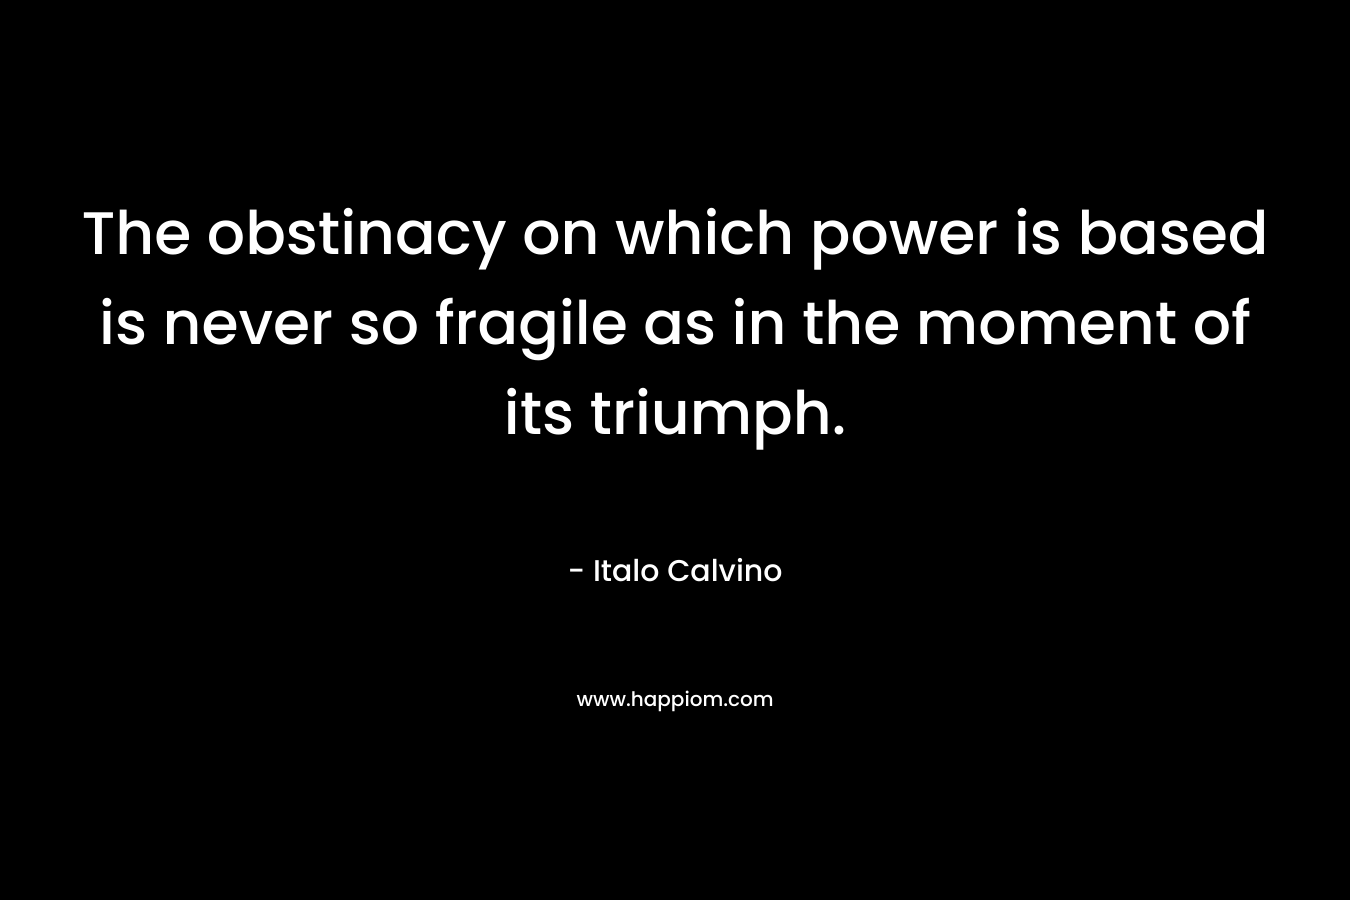 The obstinacy on which power is based is never so fragile as in the moment of its triumph.